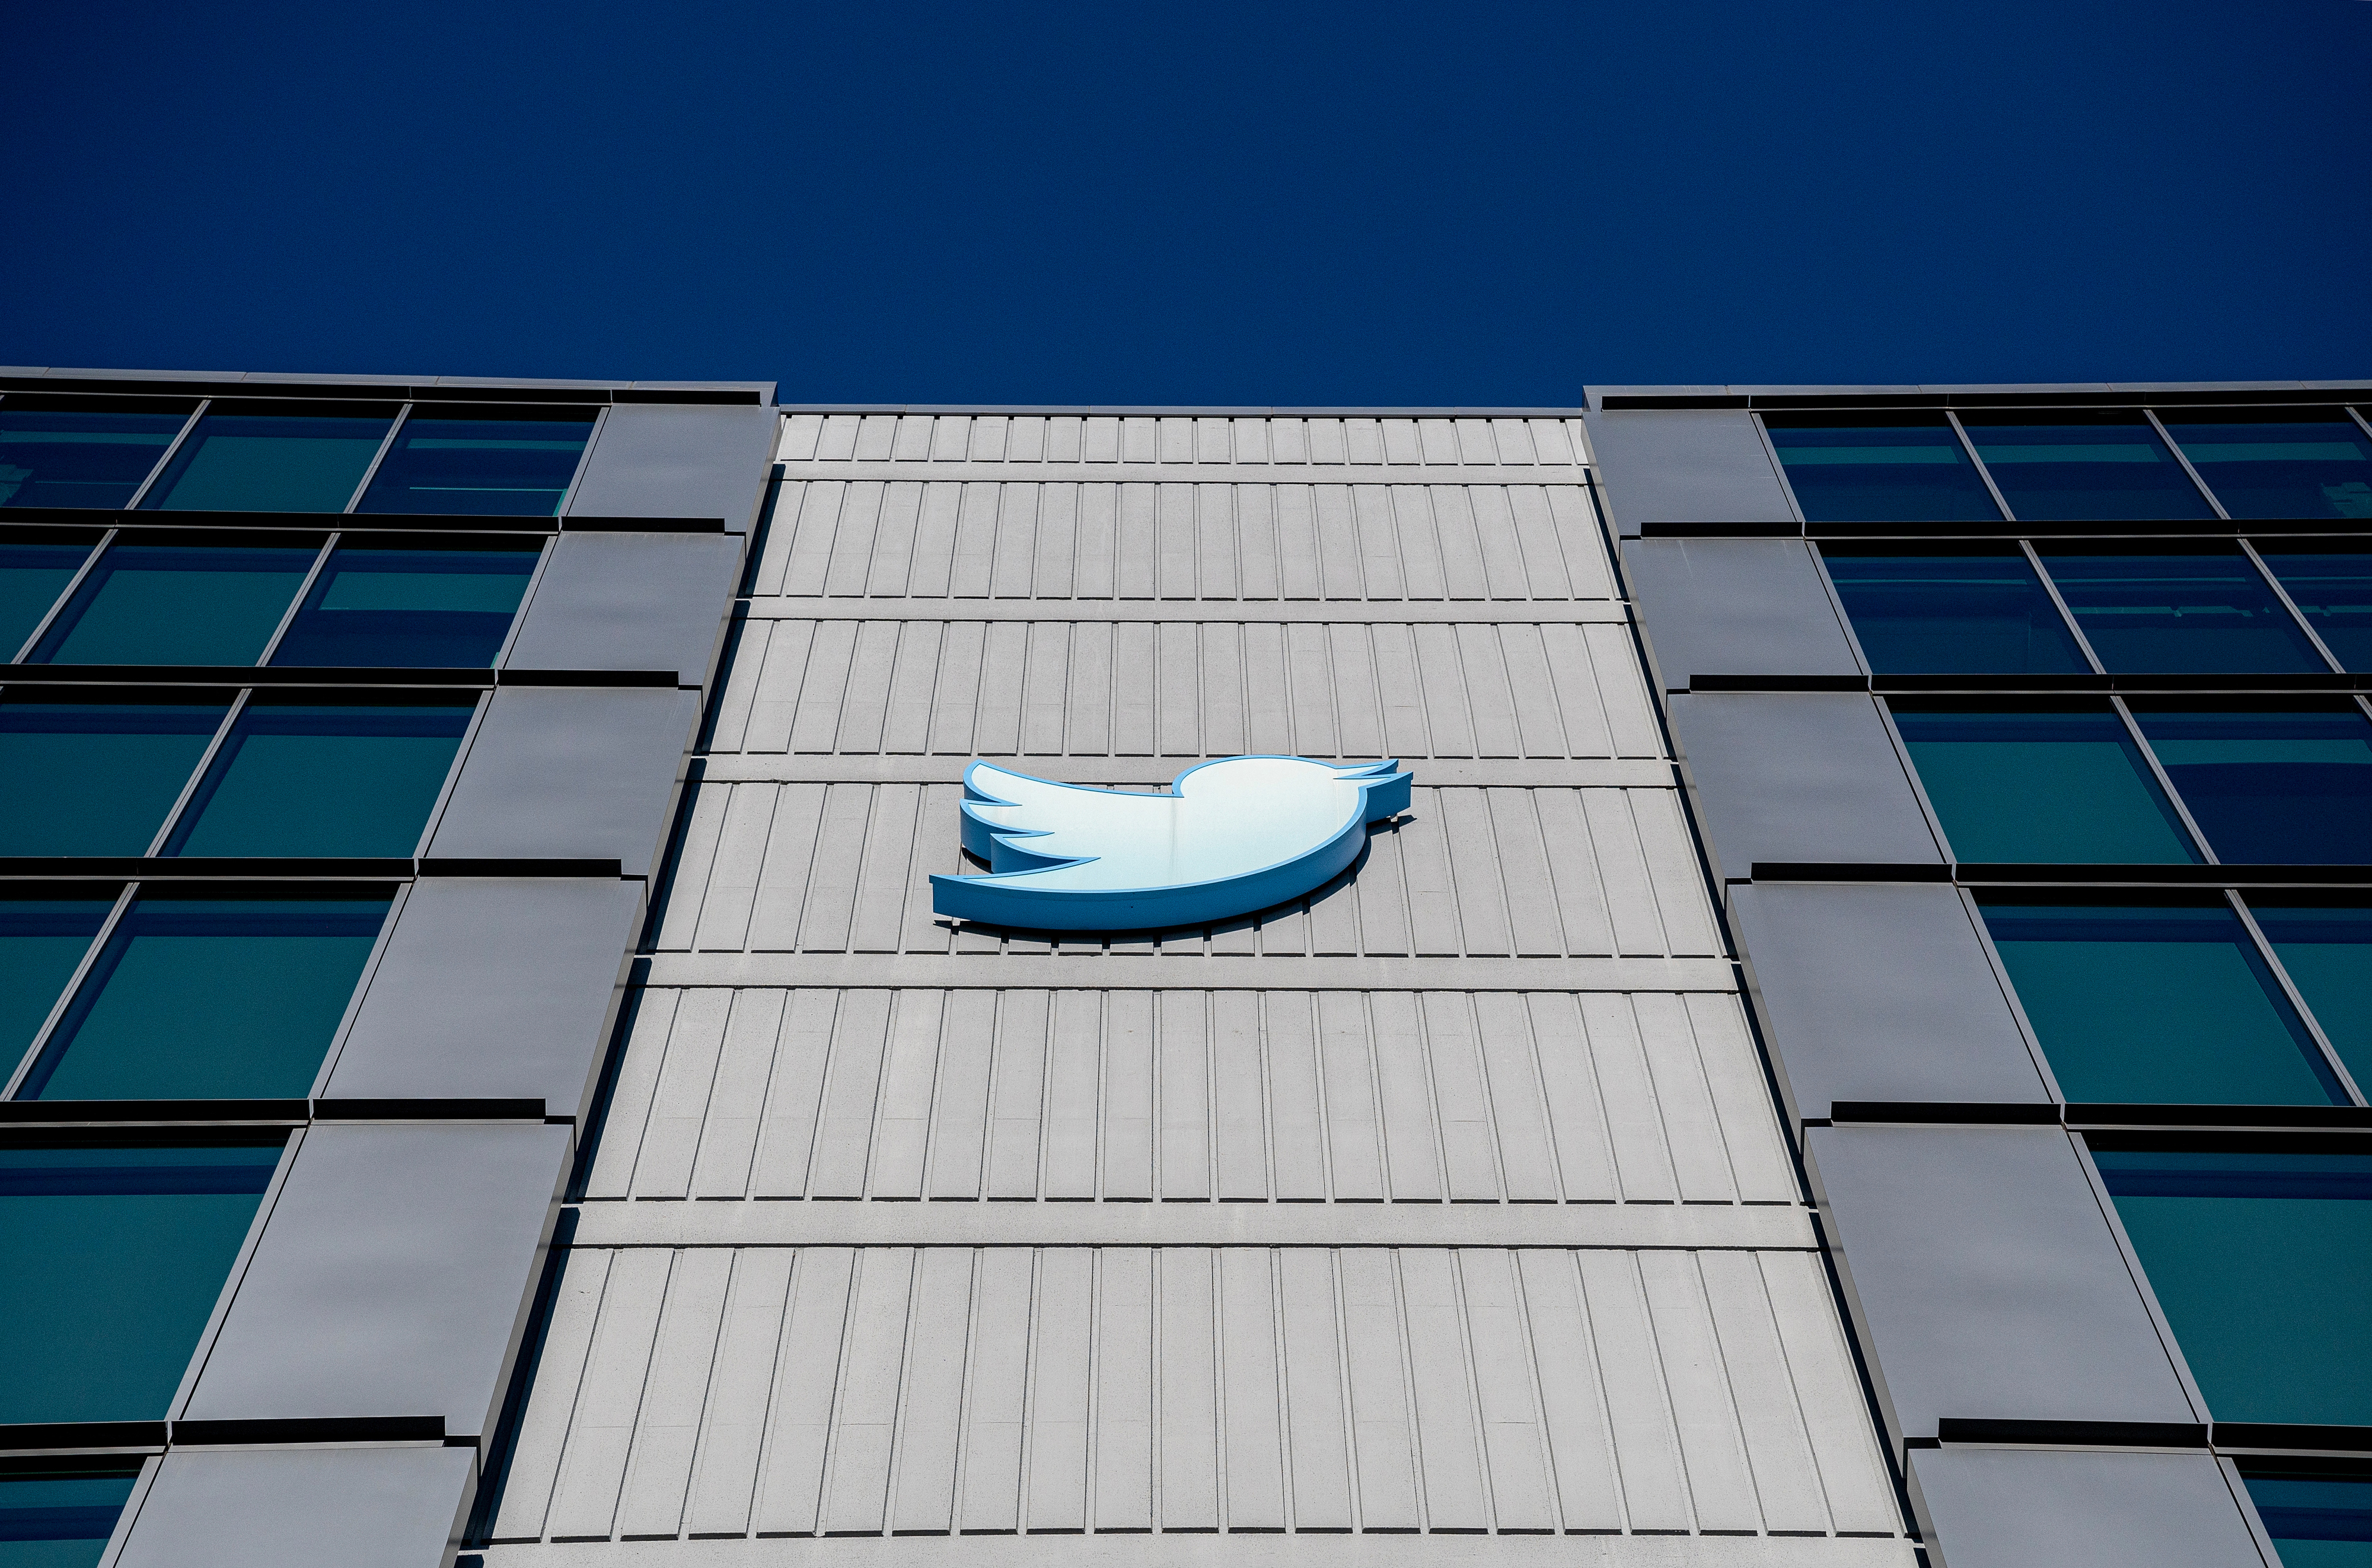 The exterior of the Twitter building in San Francisco, featuring the blue Twitter bird logo high up on the wall.